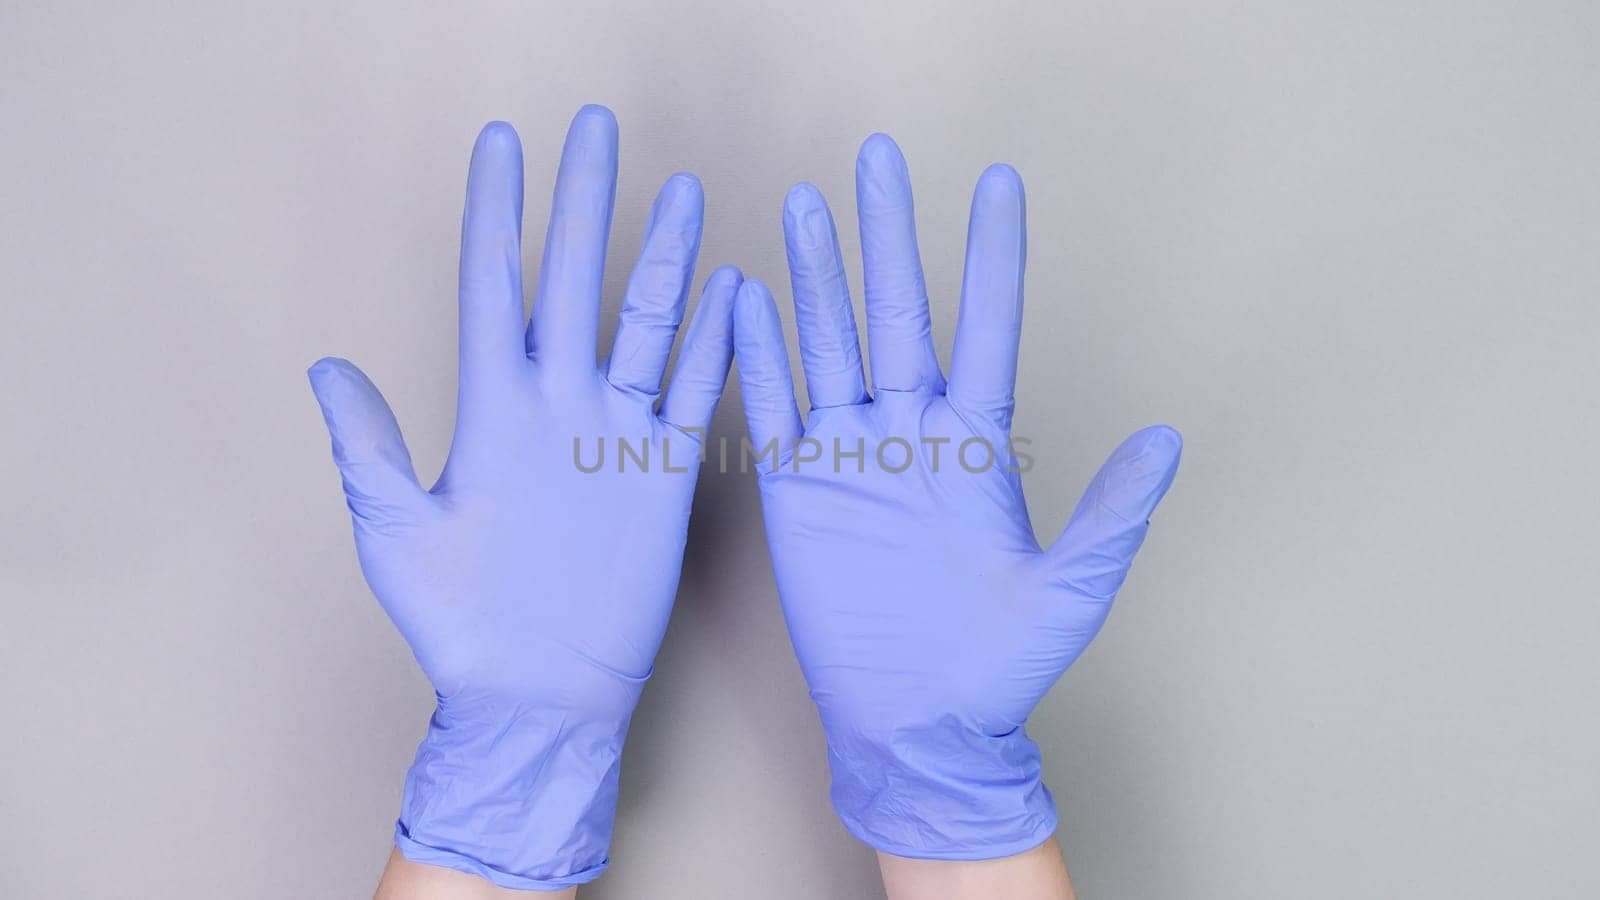 Hands in blue gloves of doctor or nurse over grey background with copy space. Medical gloves. by JuliaDorian